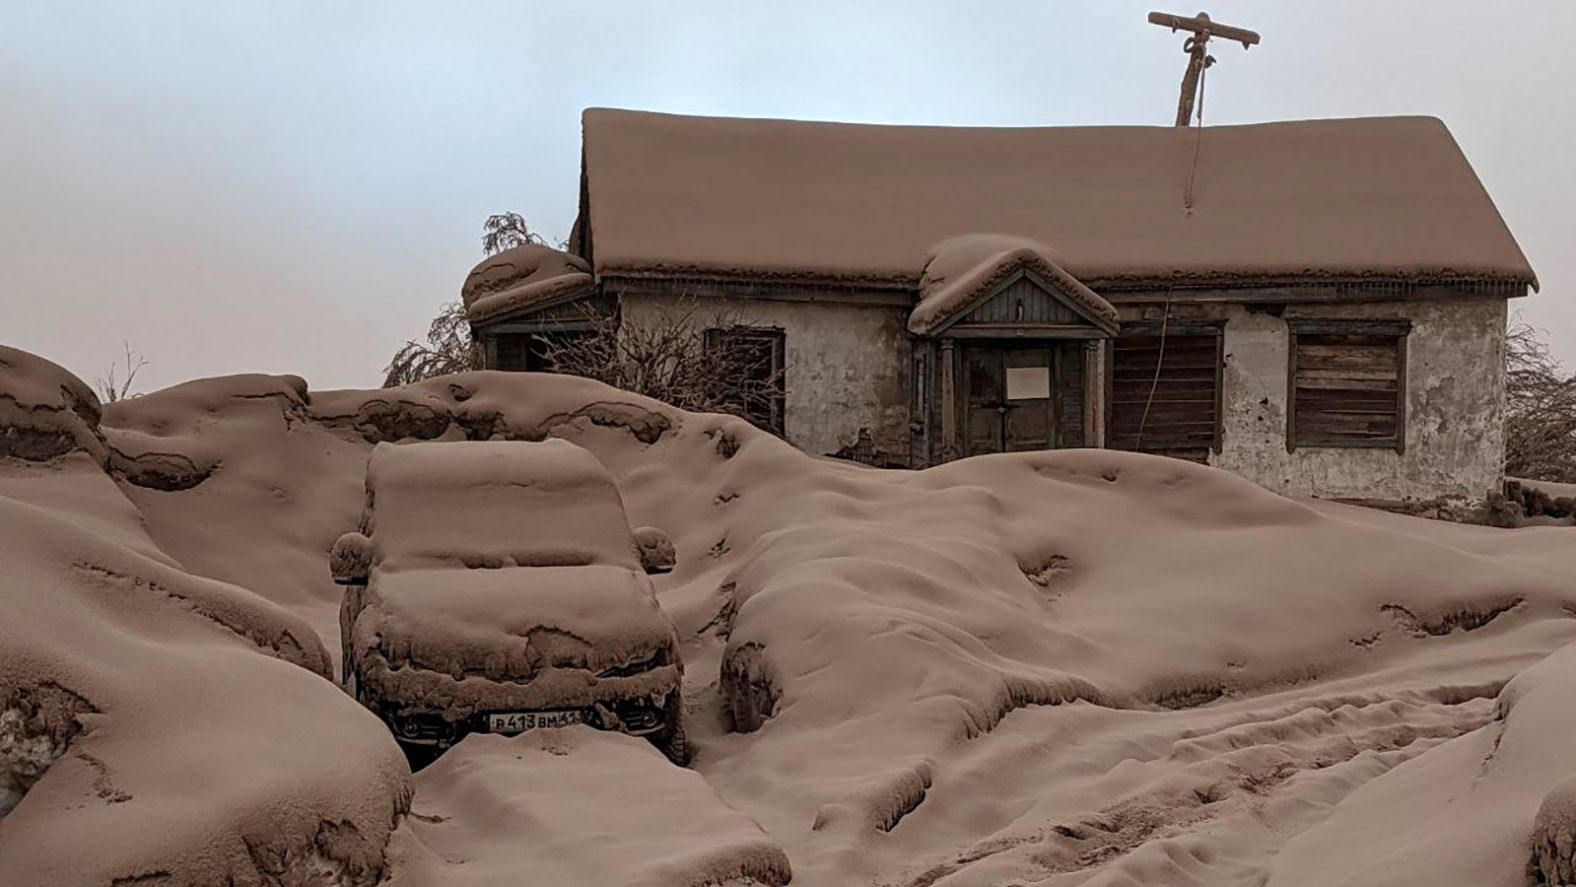 A house and a car are covered in volcanic dust Tuesday, April 11, after <a href="https://www.cnn.com/2023/04/11/europe/russia-kamchatka-eruption-intl/index.html" target="_blank">the eruption of the Shiveluch volcano</a> in Russia's far eastern Kamchatka region.